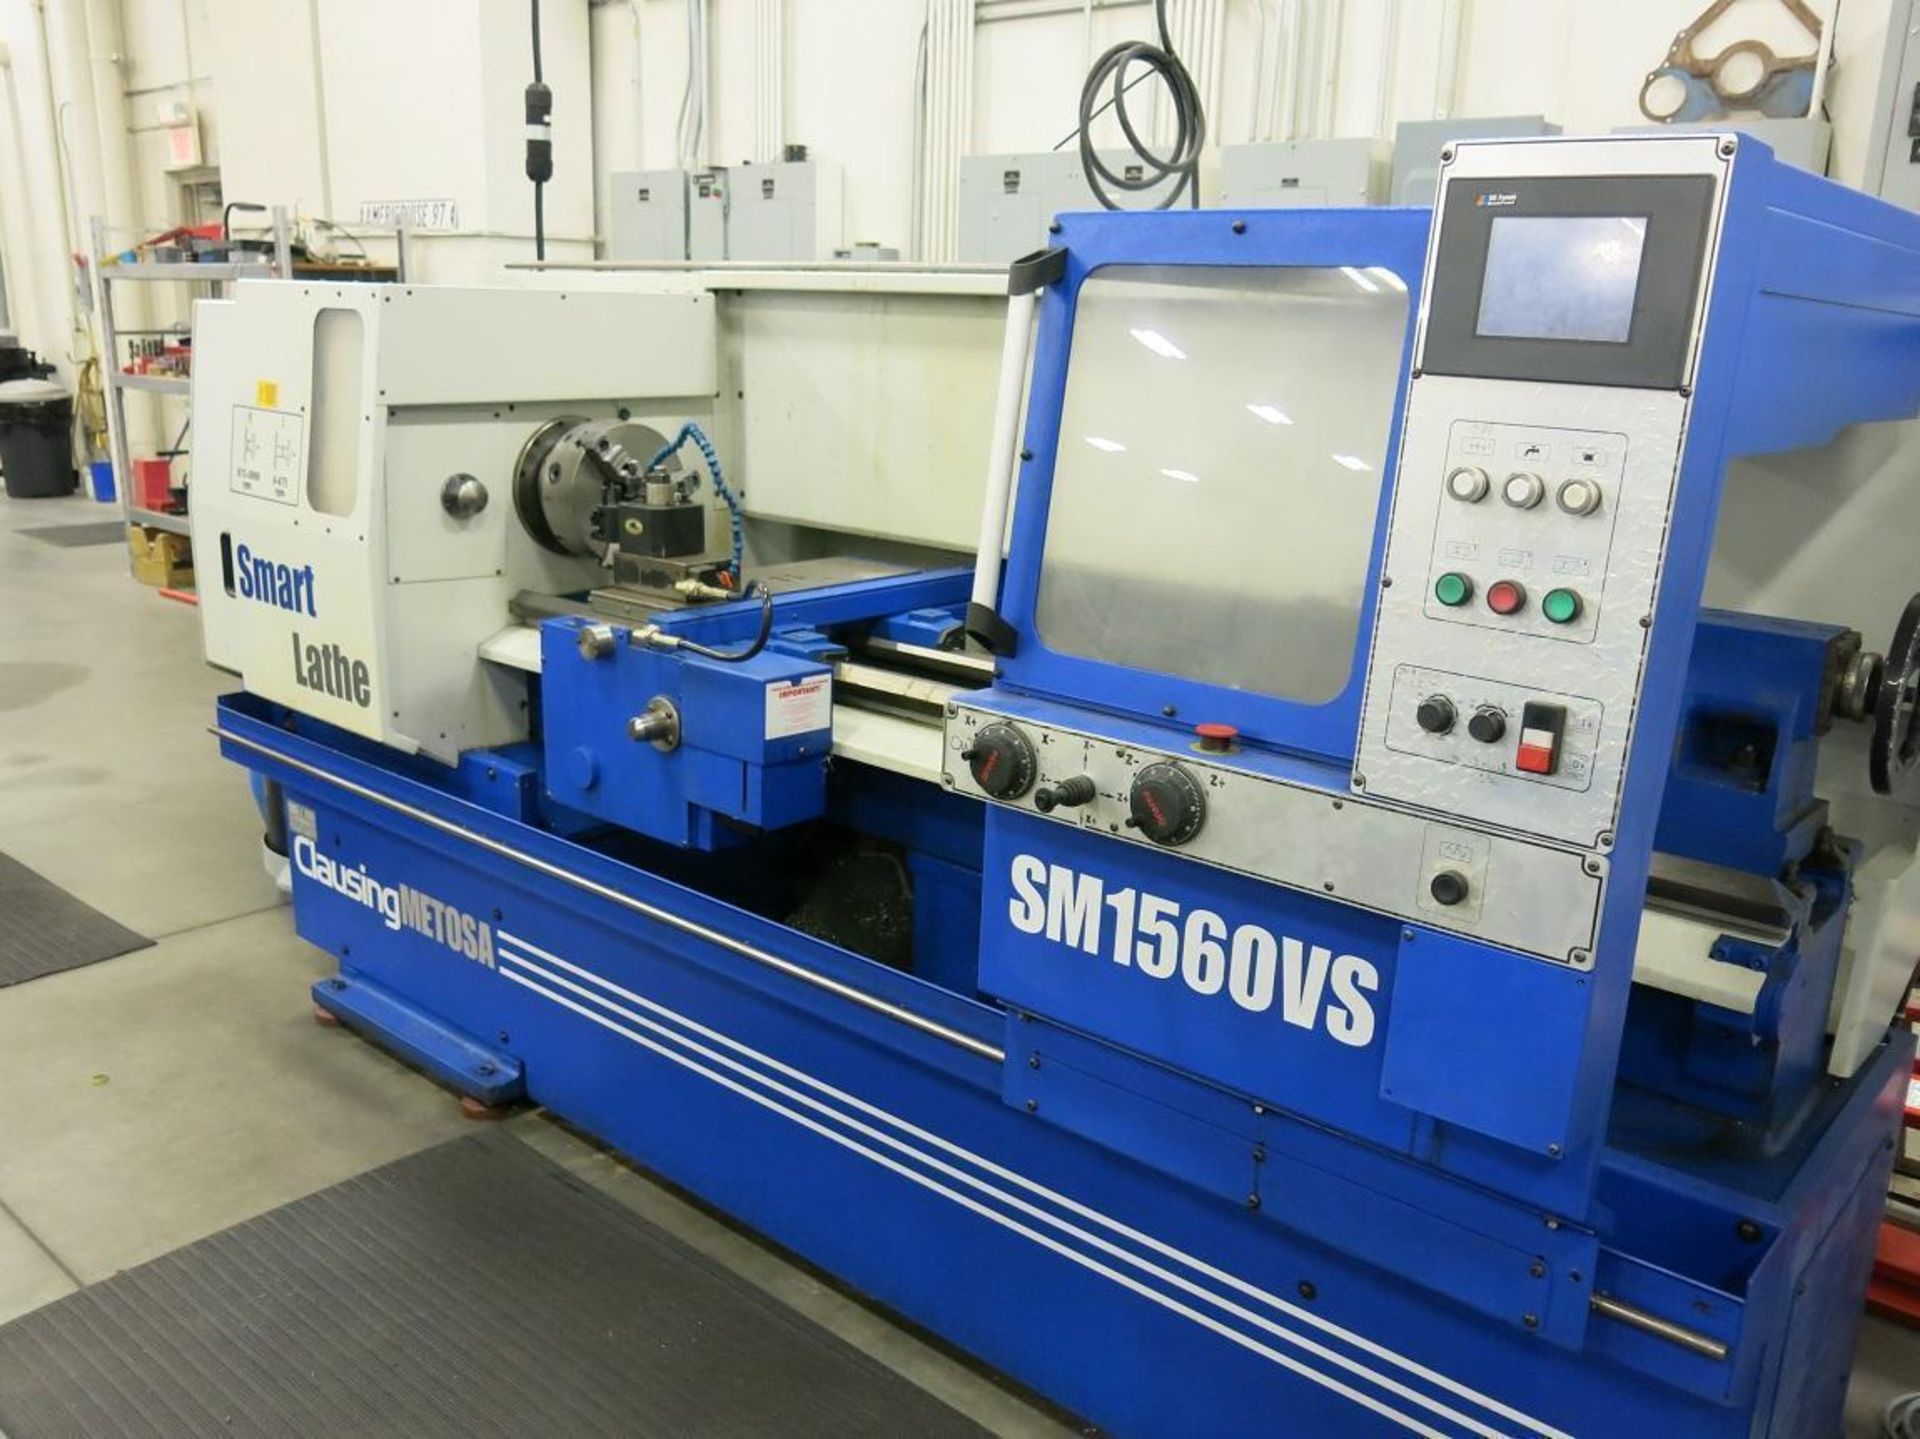 15" Clausing Metosa Smart SM1560VS CNC Engine Lathe, Capacity: 15' x 60", GE Fanuc Touch Panel Contr - Image 2 of 7